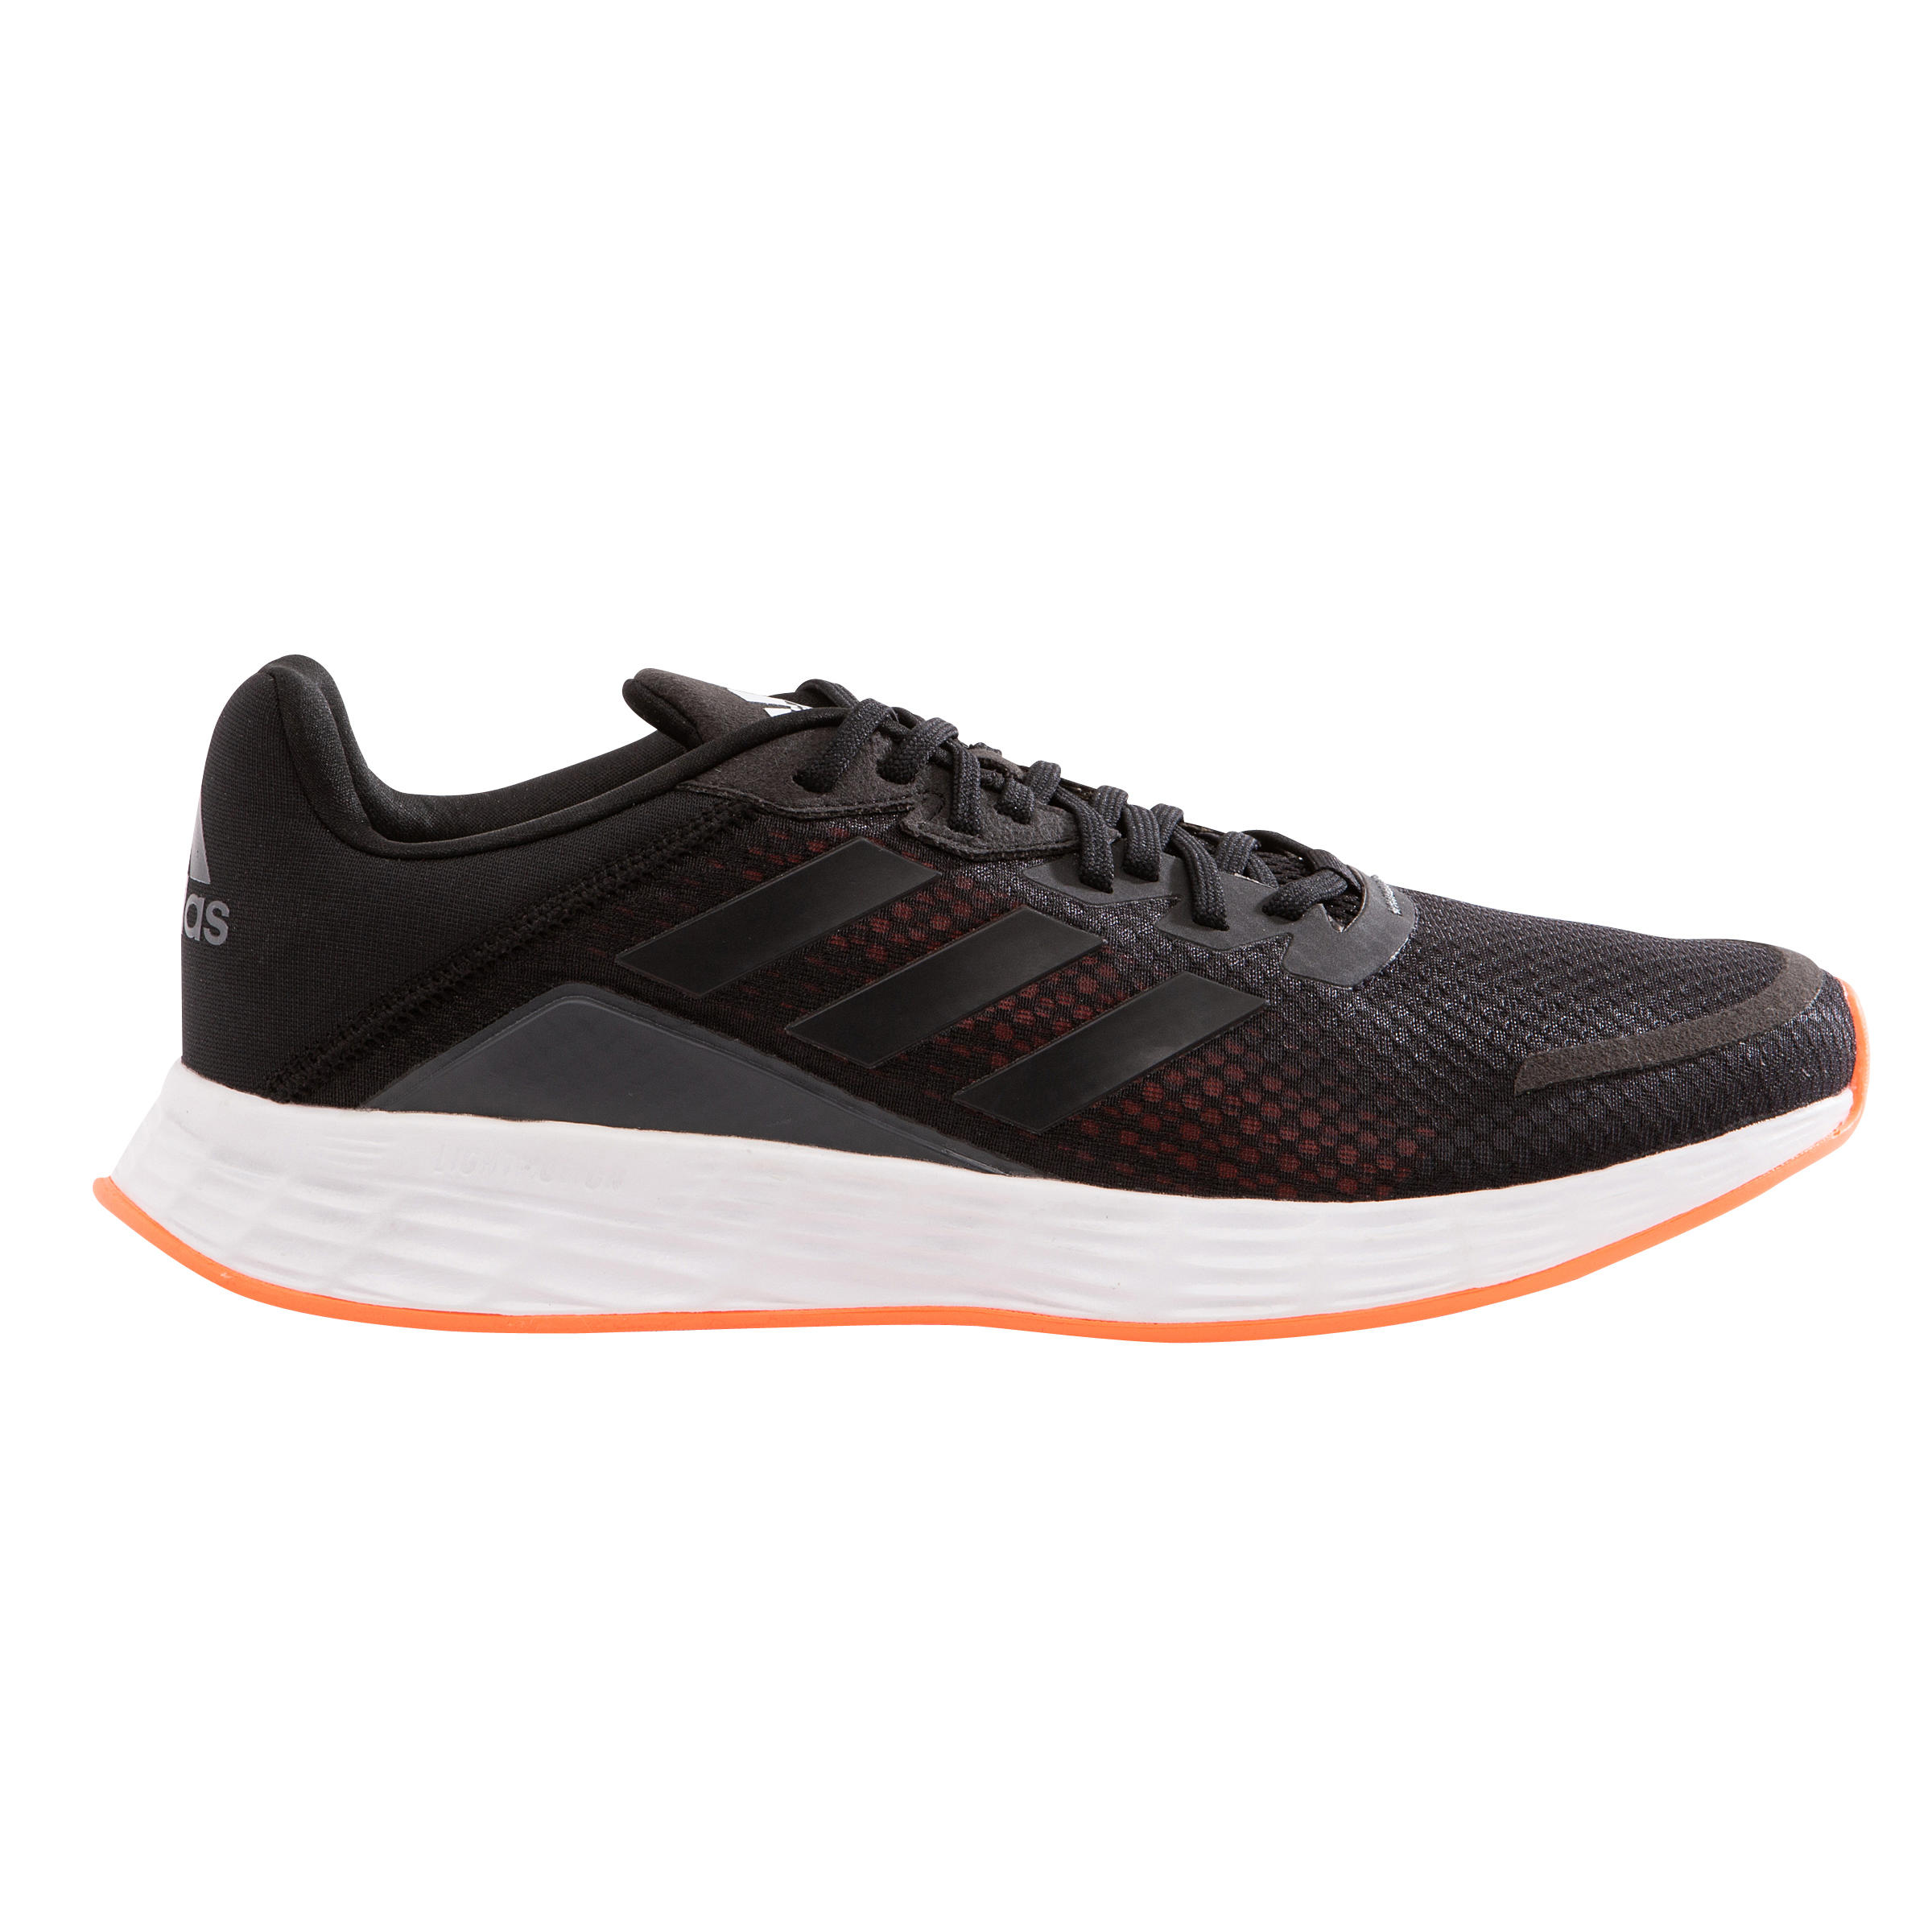 adidas running shoes homme